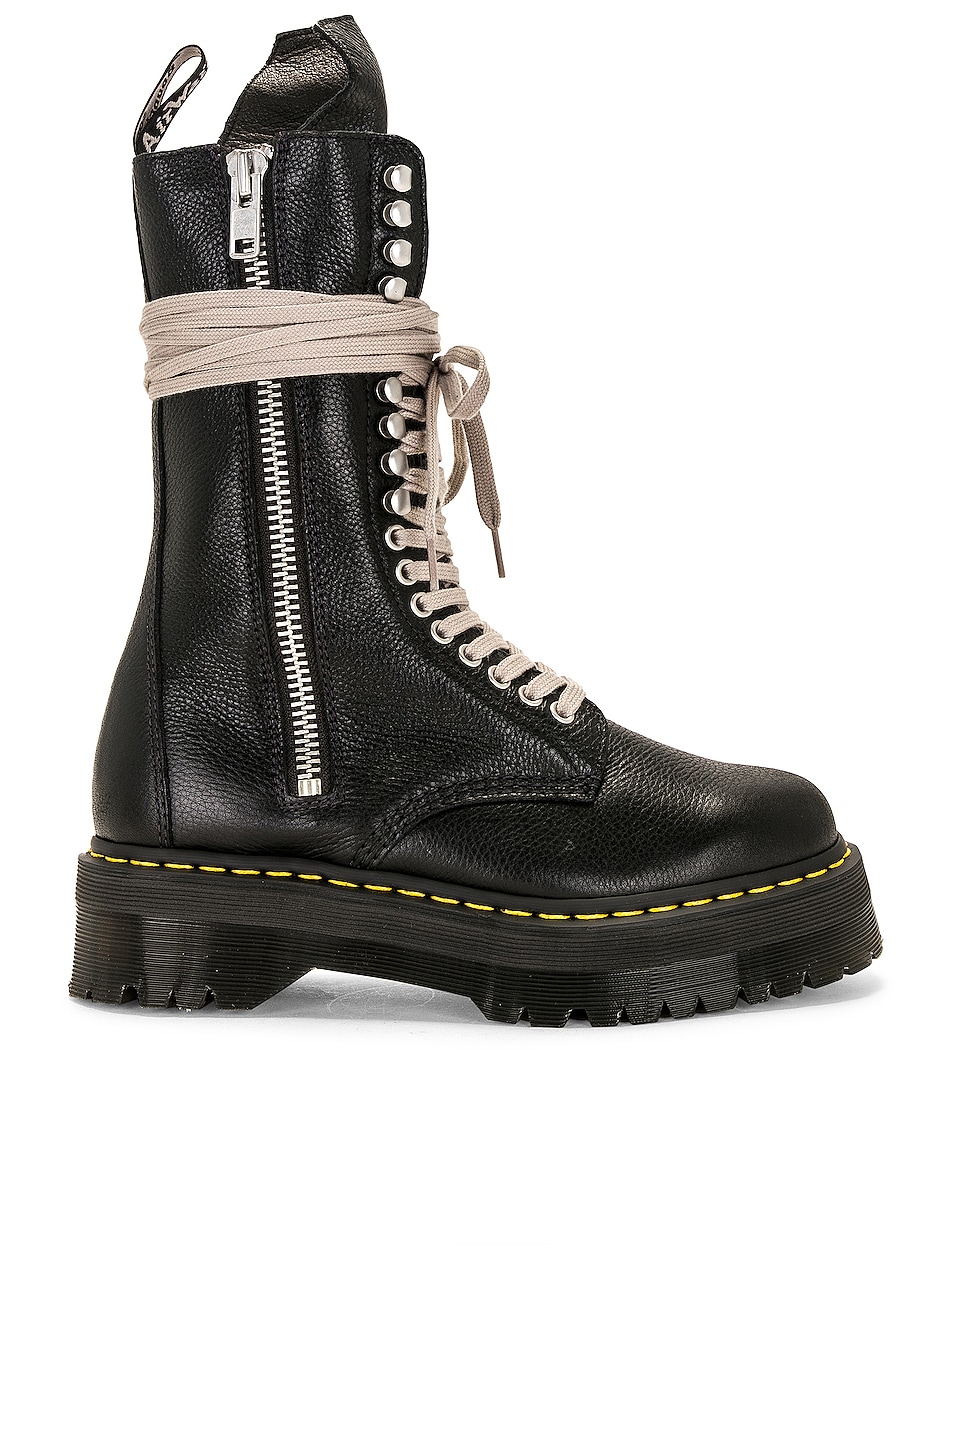 Image 1 of Rick Owens X Dr Martens Quad Sole Calf Length Boot in Black